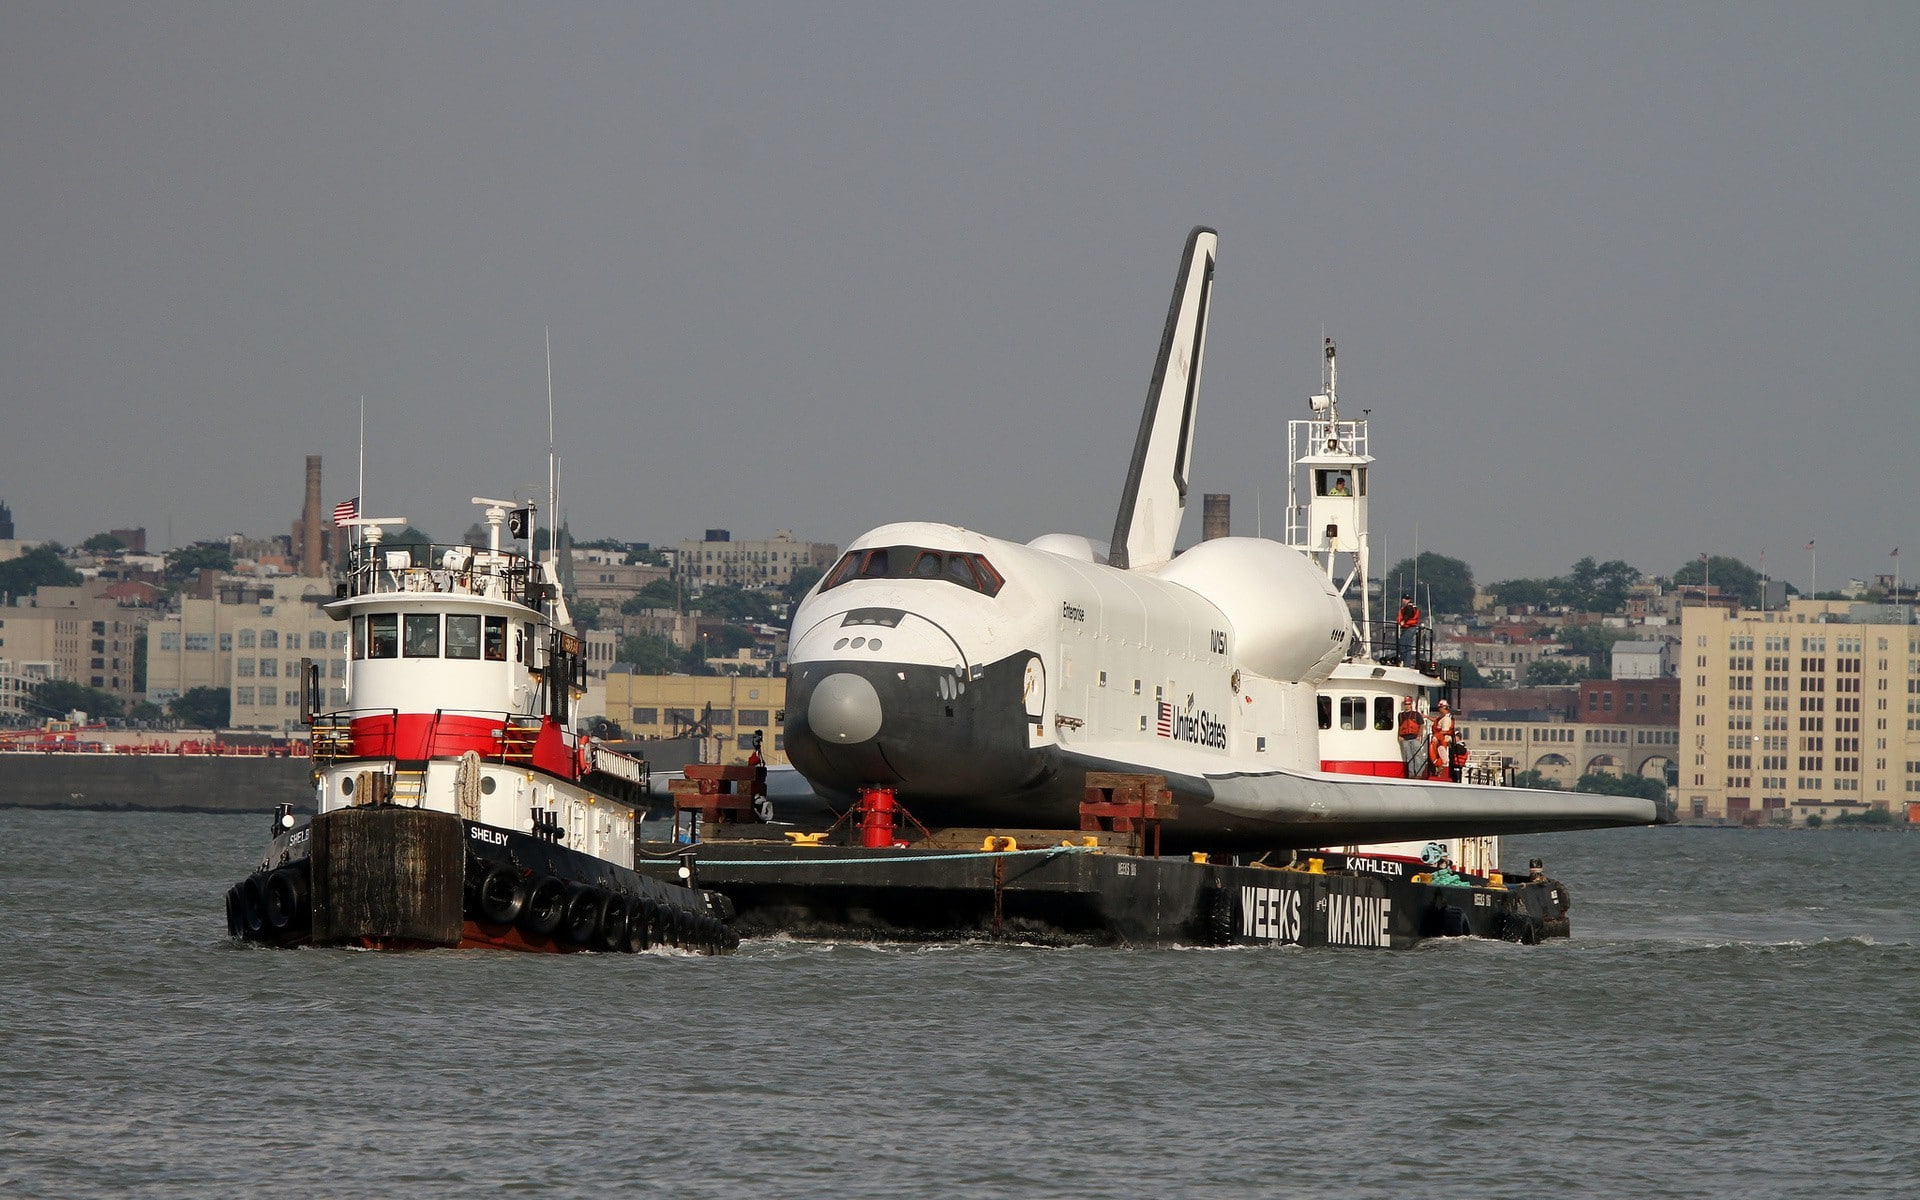 space shuttle, vehicle